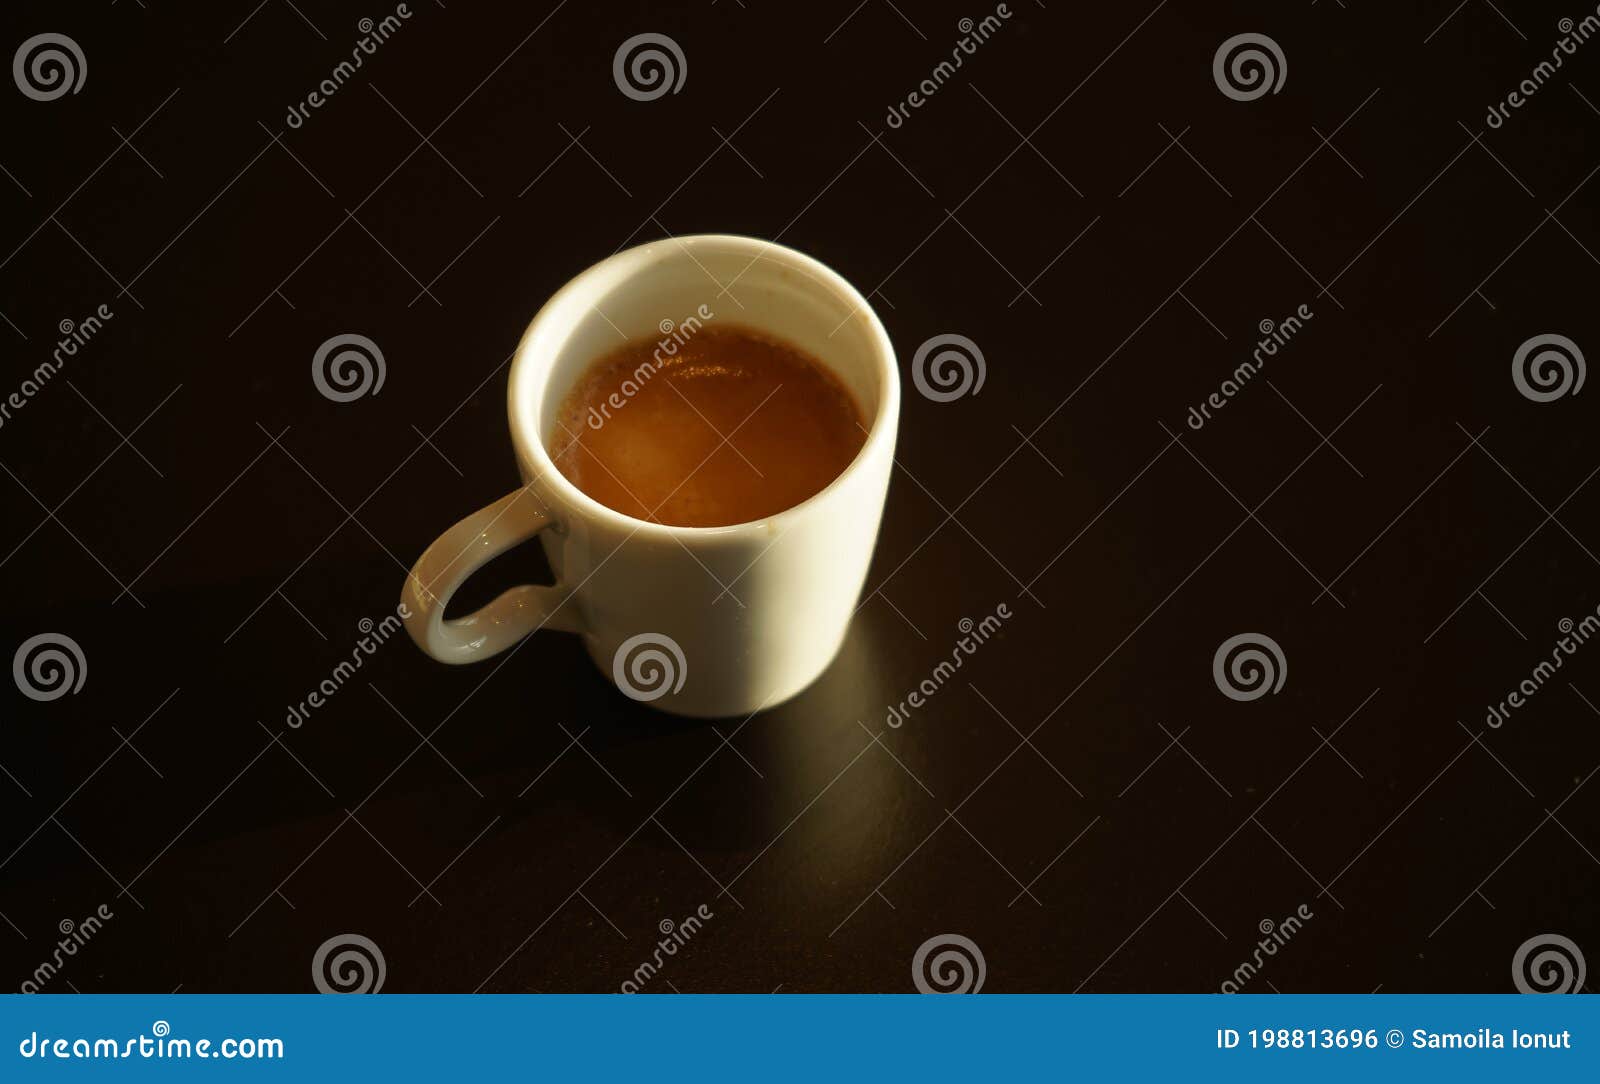 cup of espresso placed on the table